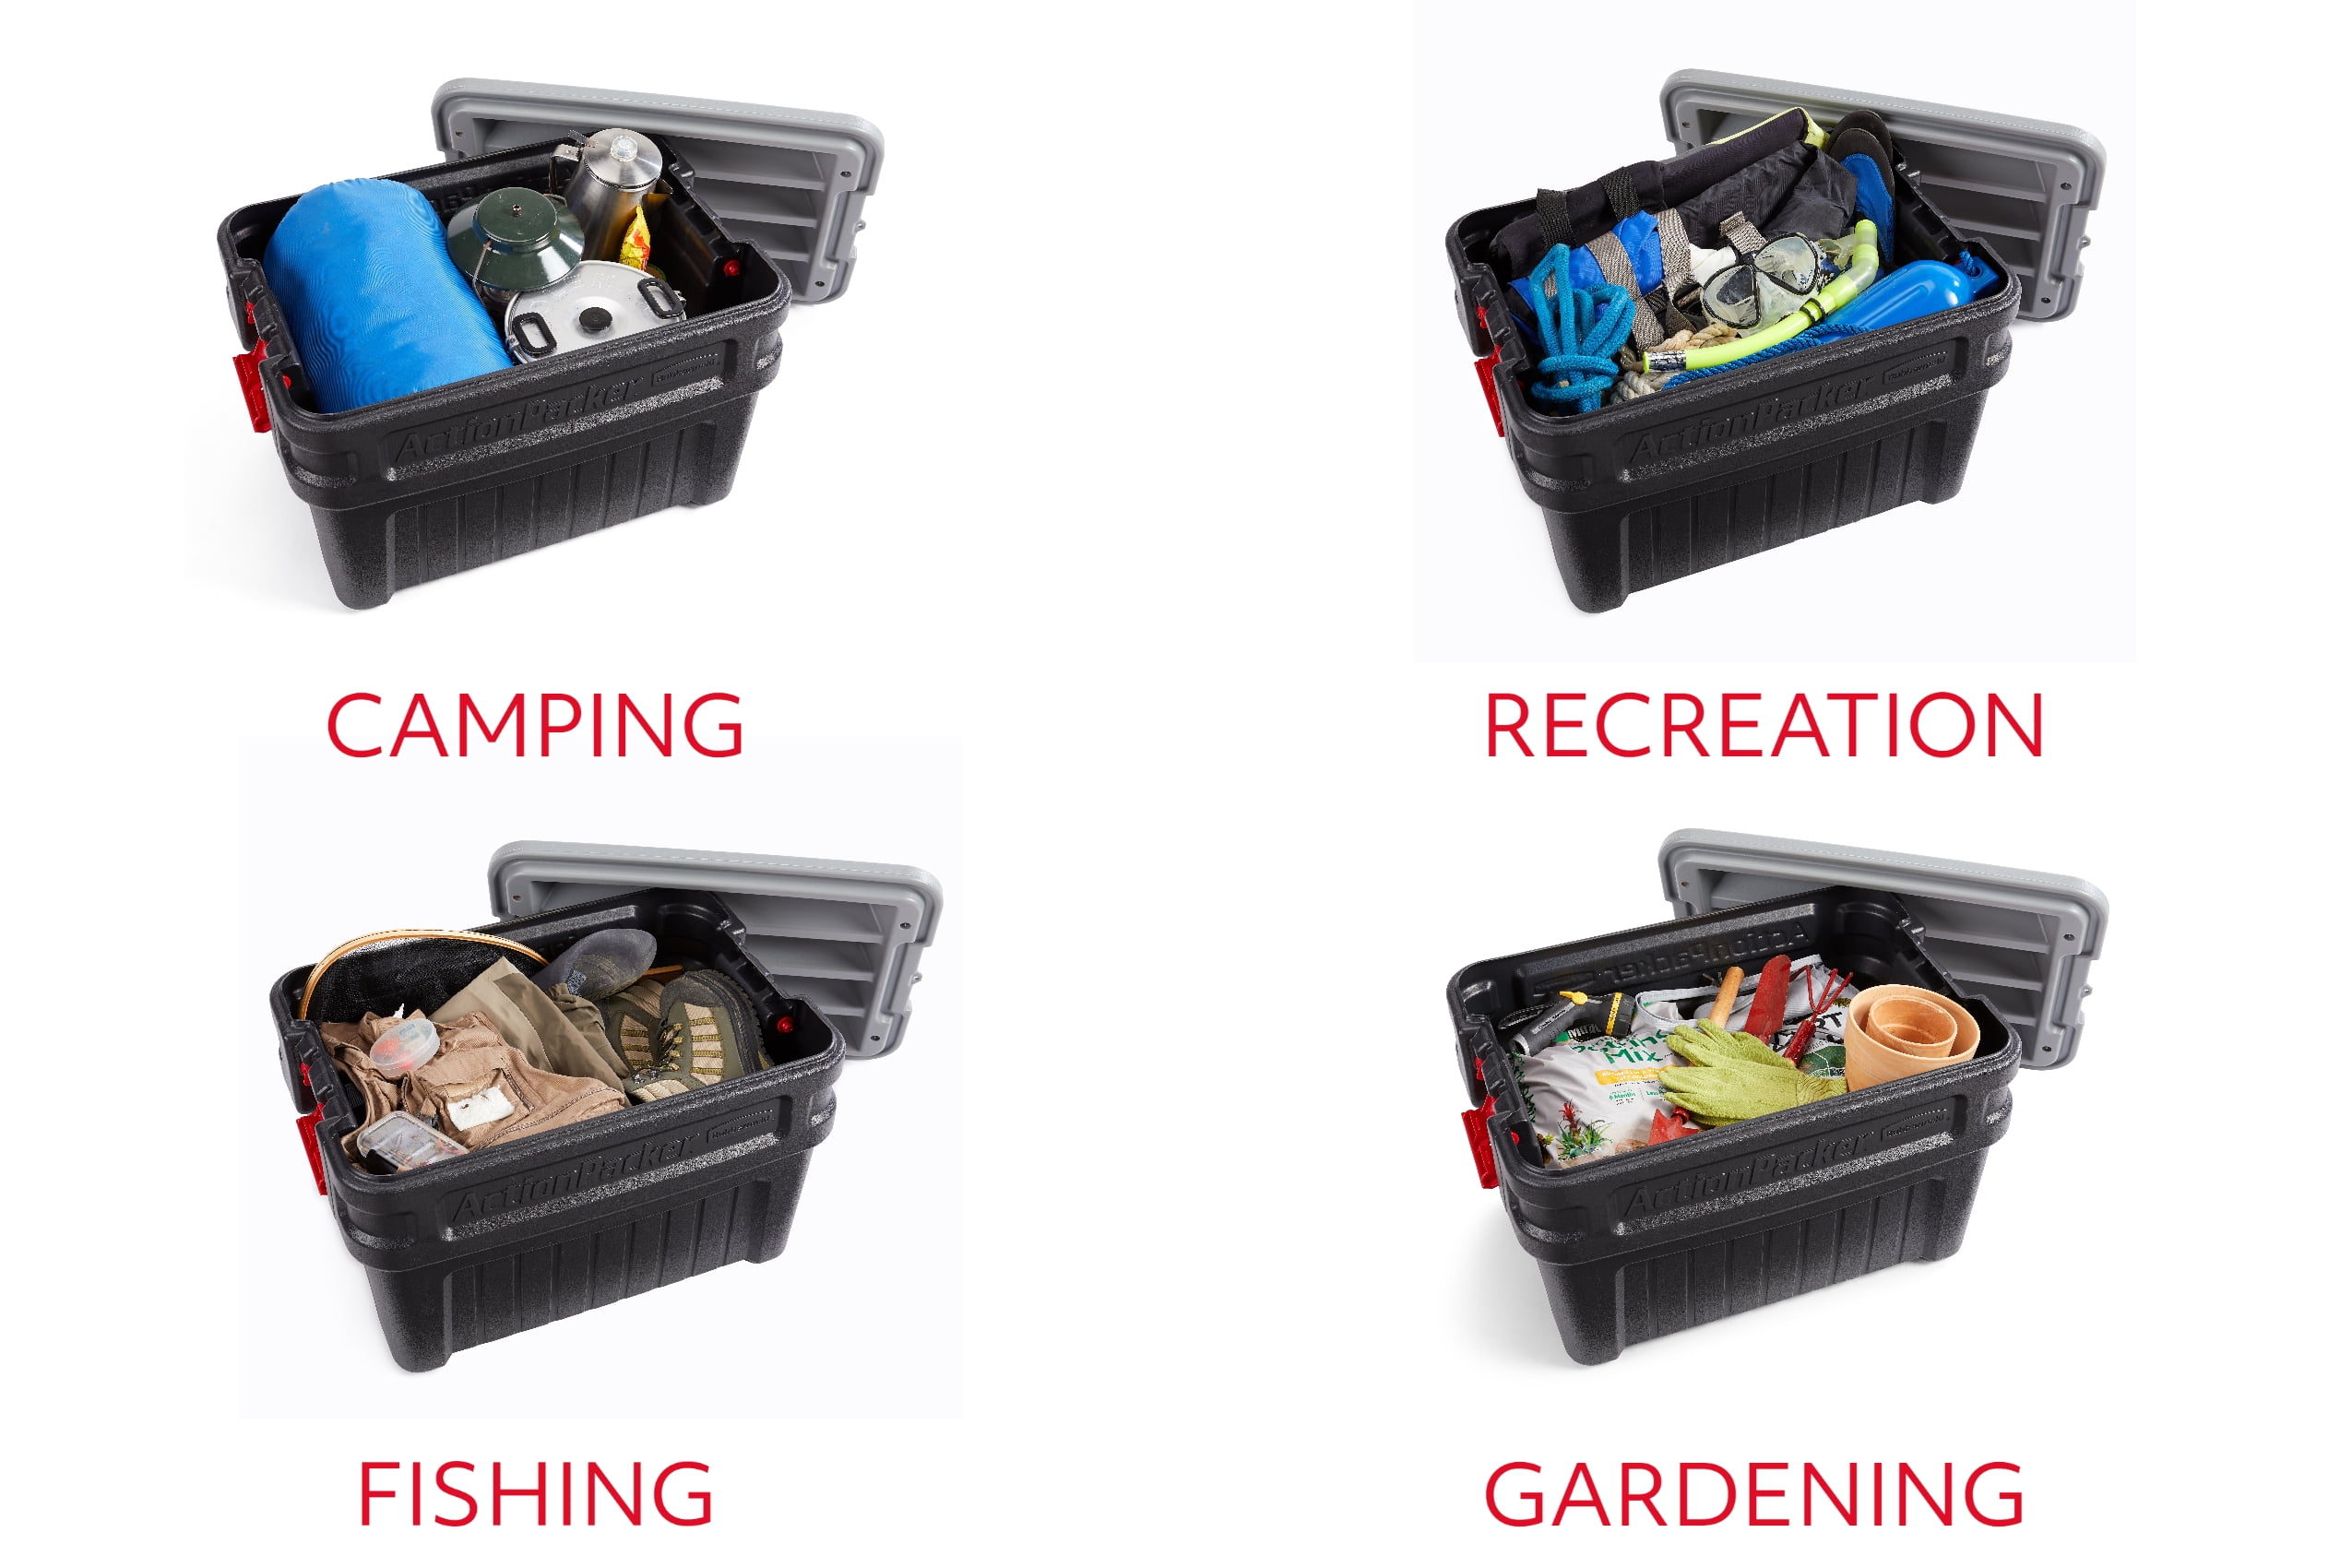 RUBBERMAID 1191 - ActionPacker® Storage Container Type Tool Box